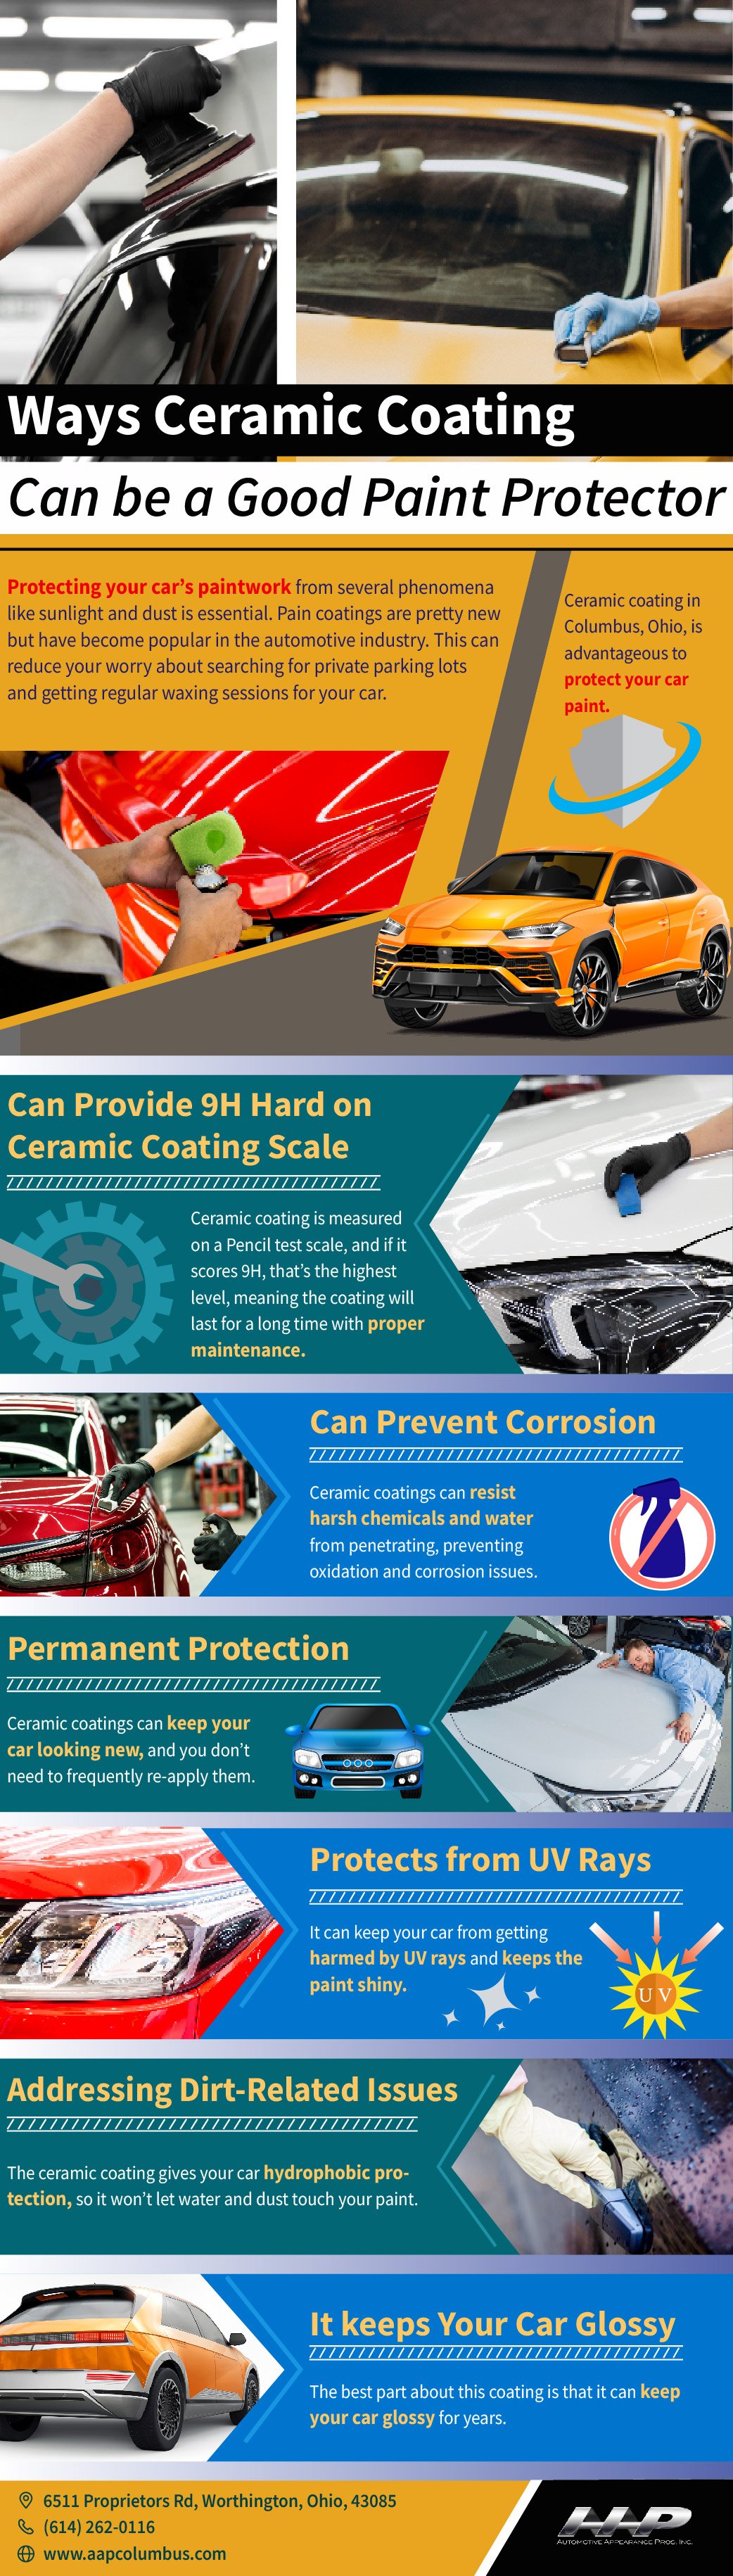 5 Tips To Keep Your Ceramic Coated Car Clean